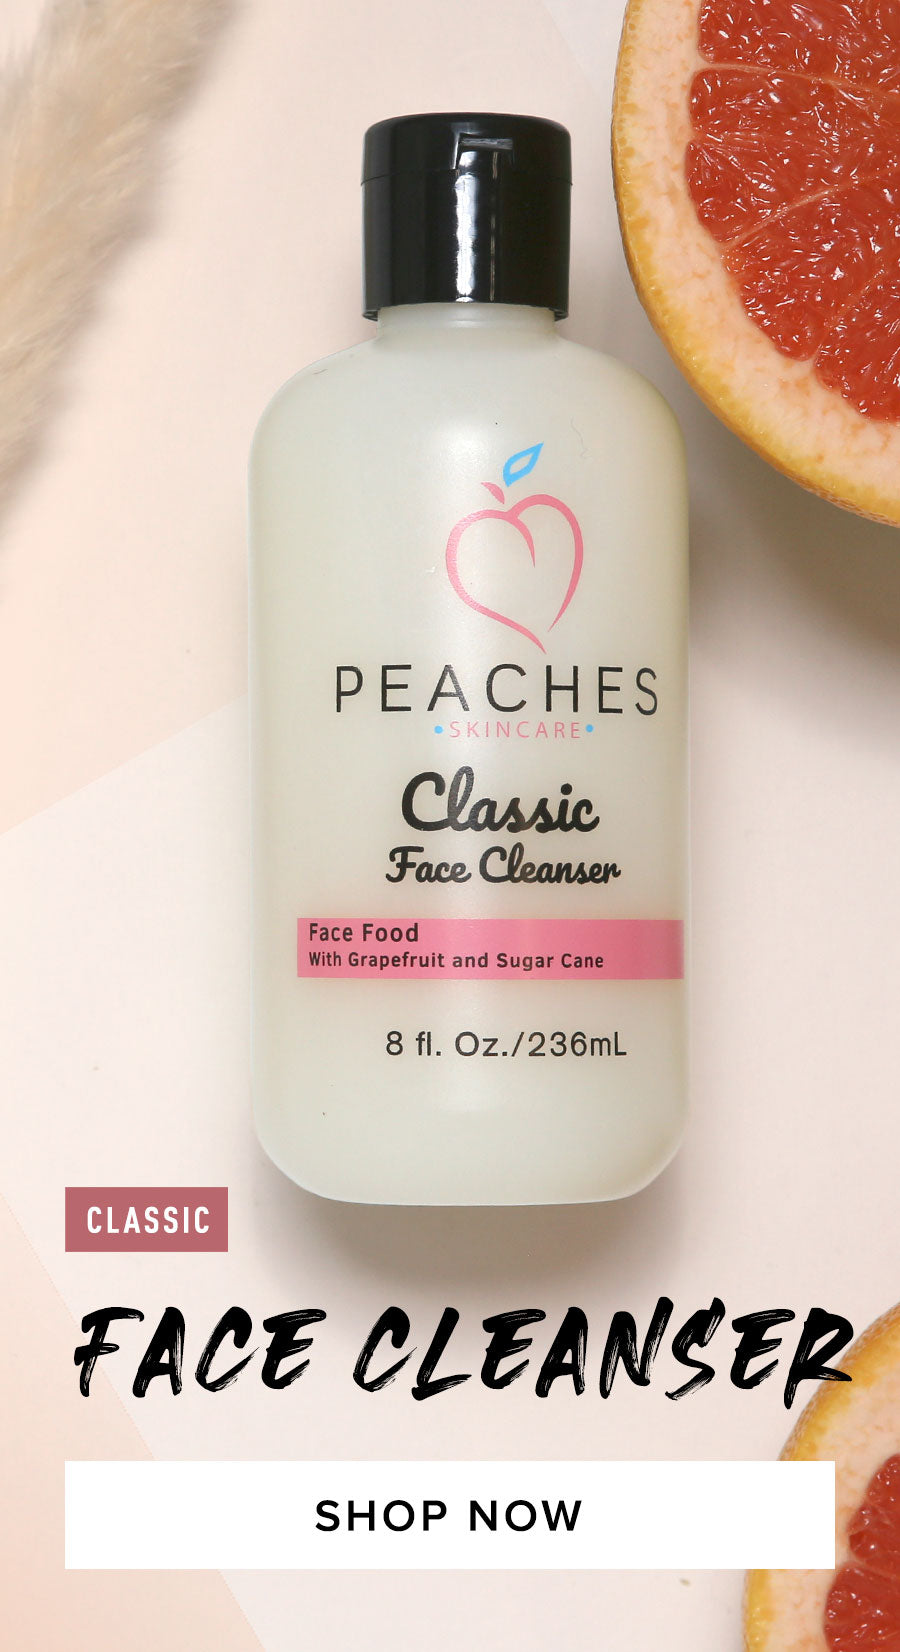 Peaches Skincare | Best Facials and Skincare Products Beach, C